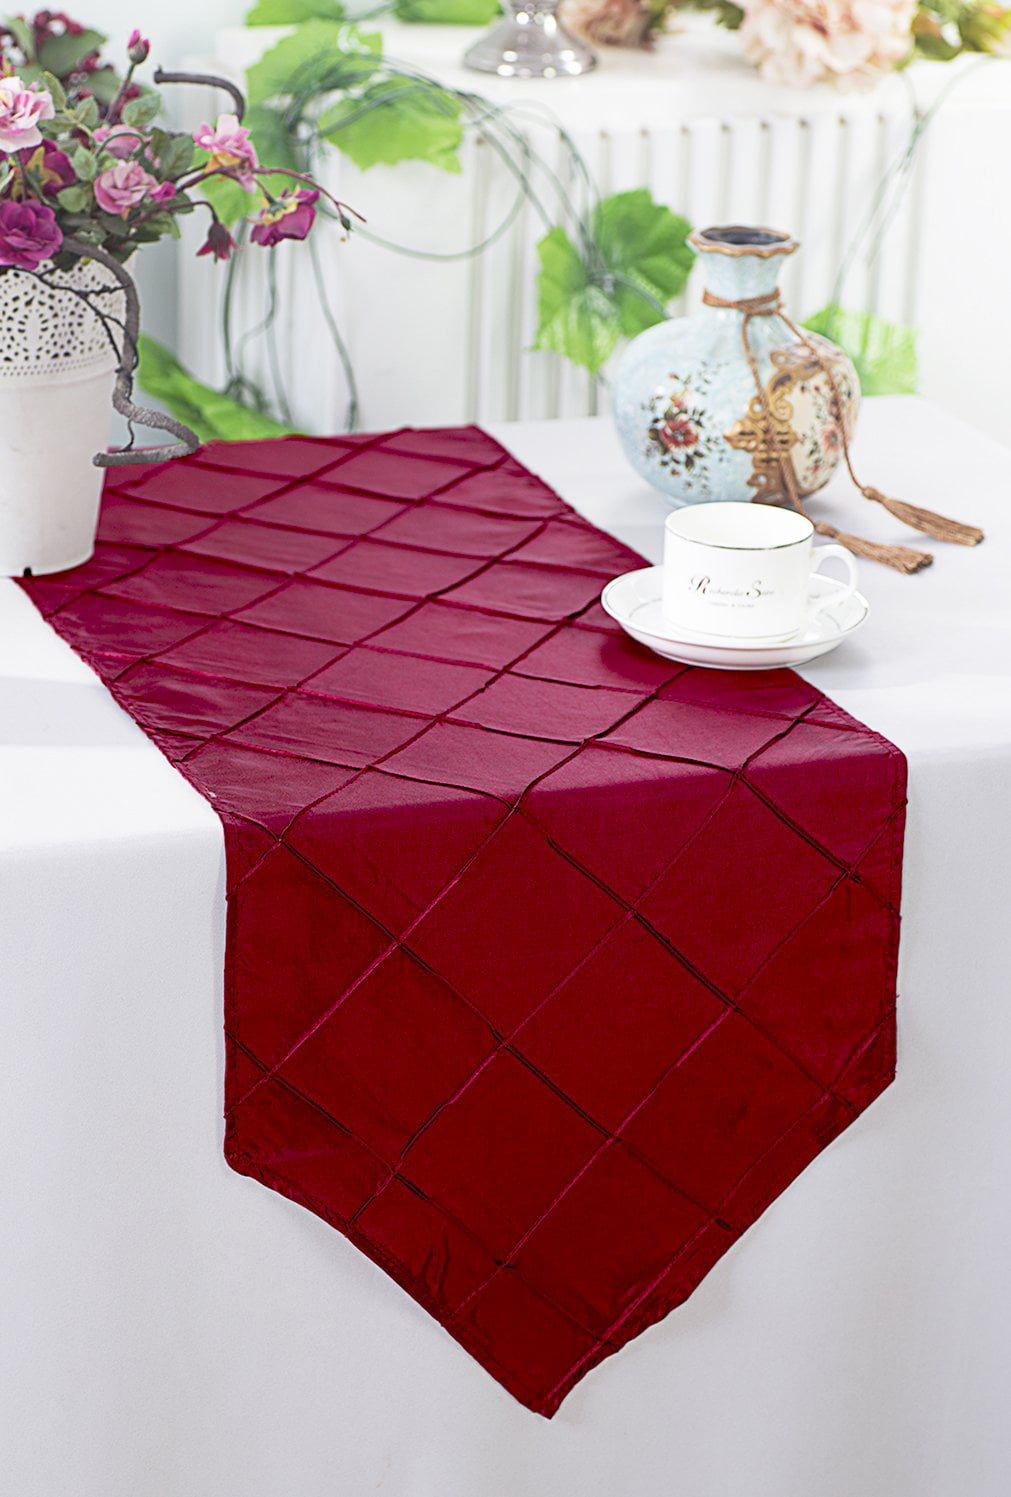 Brocade Table Runner Wedding Banquet Party Tabletop Decoration Runner Tablecloth 